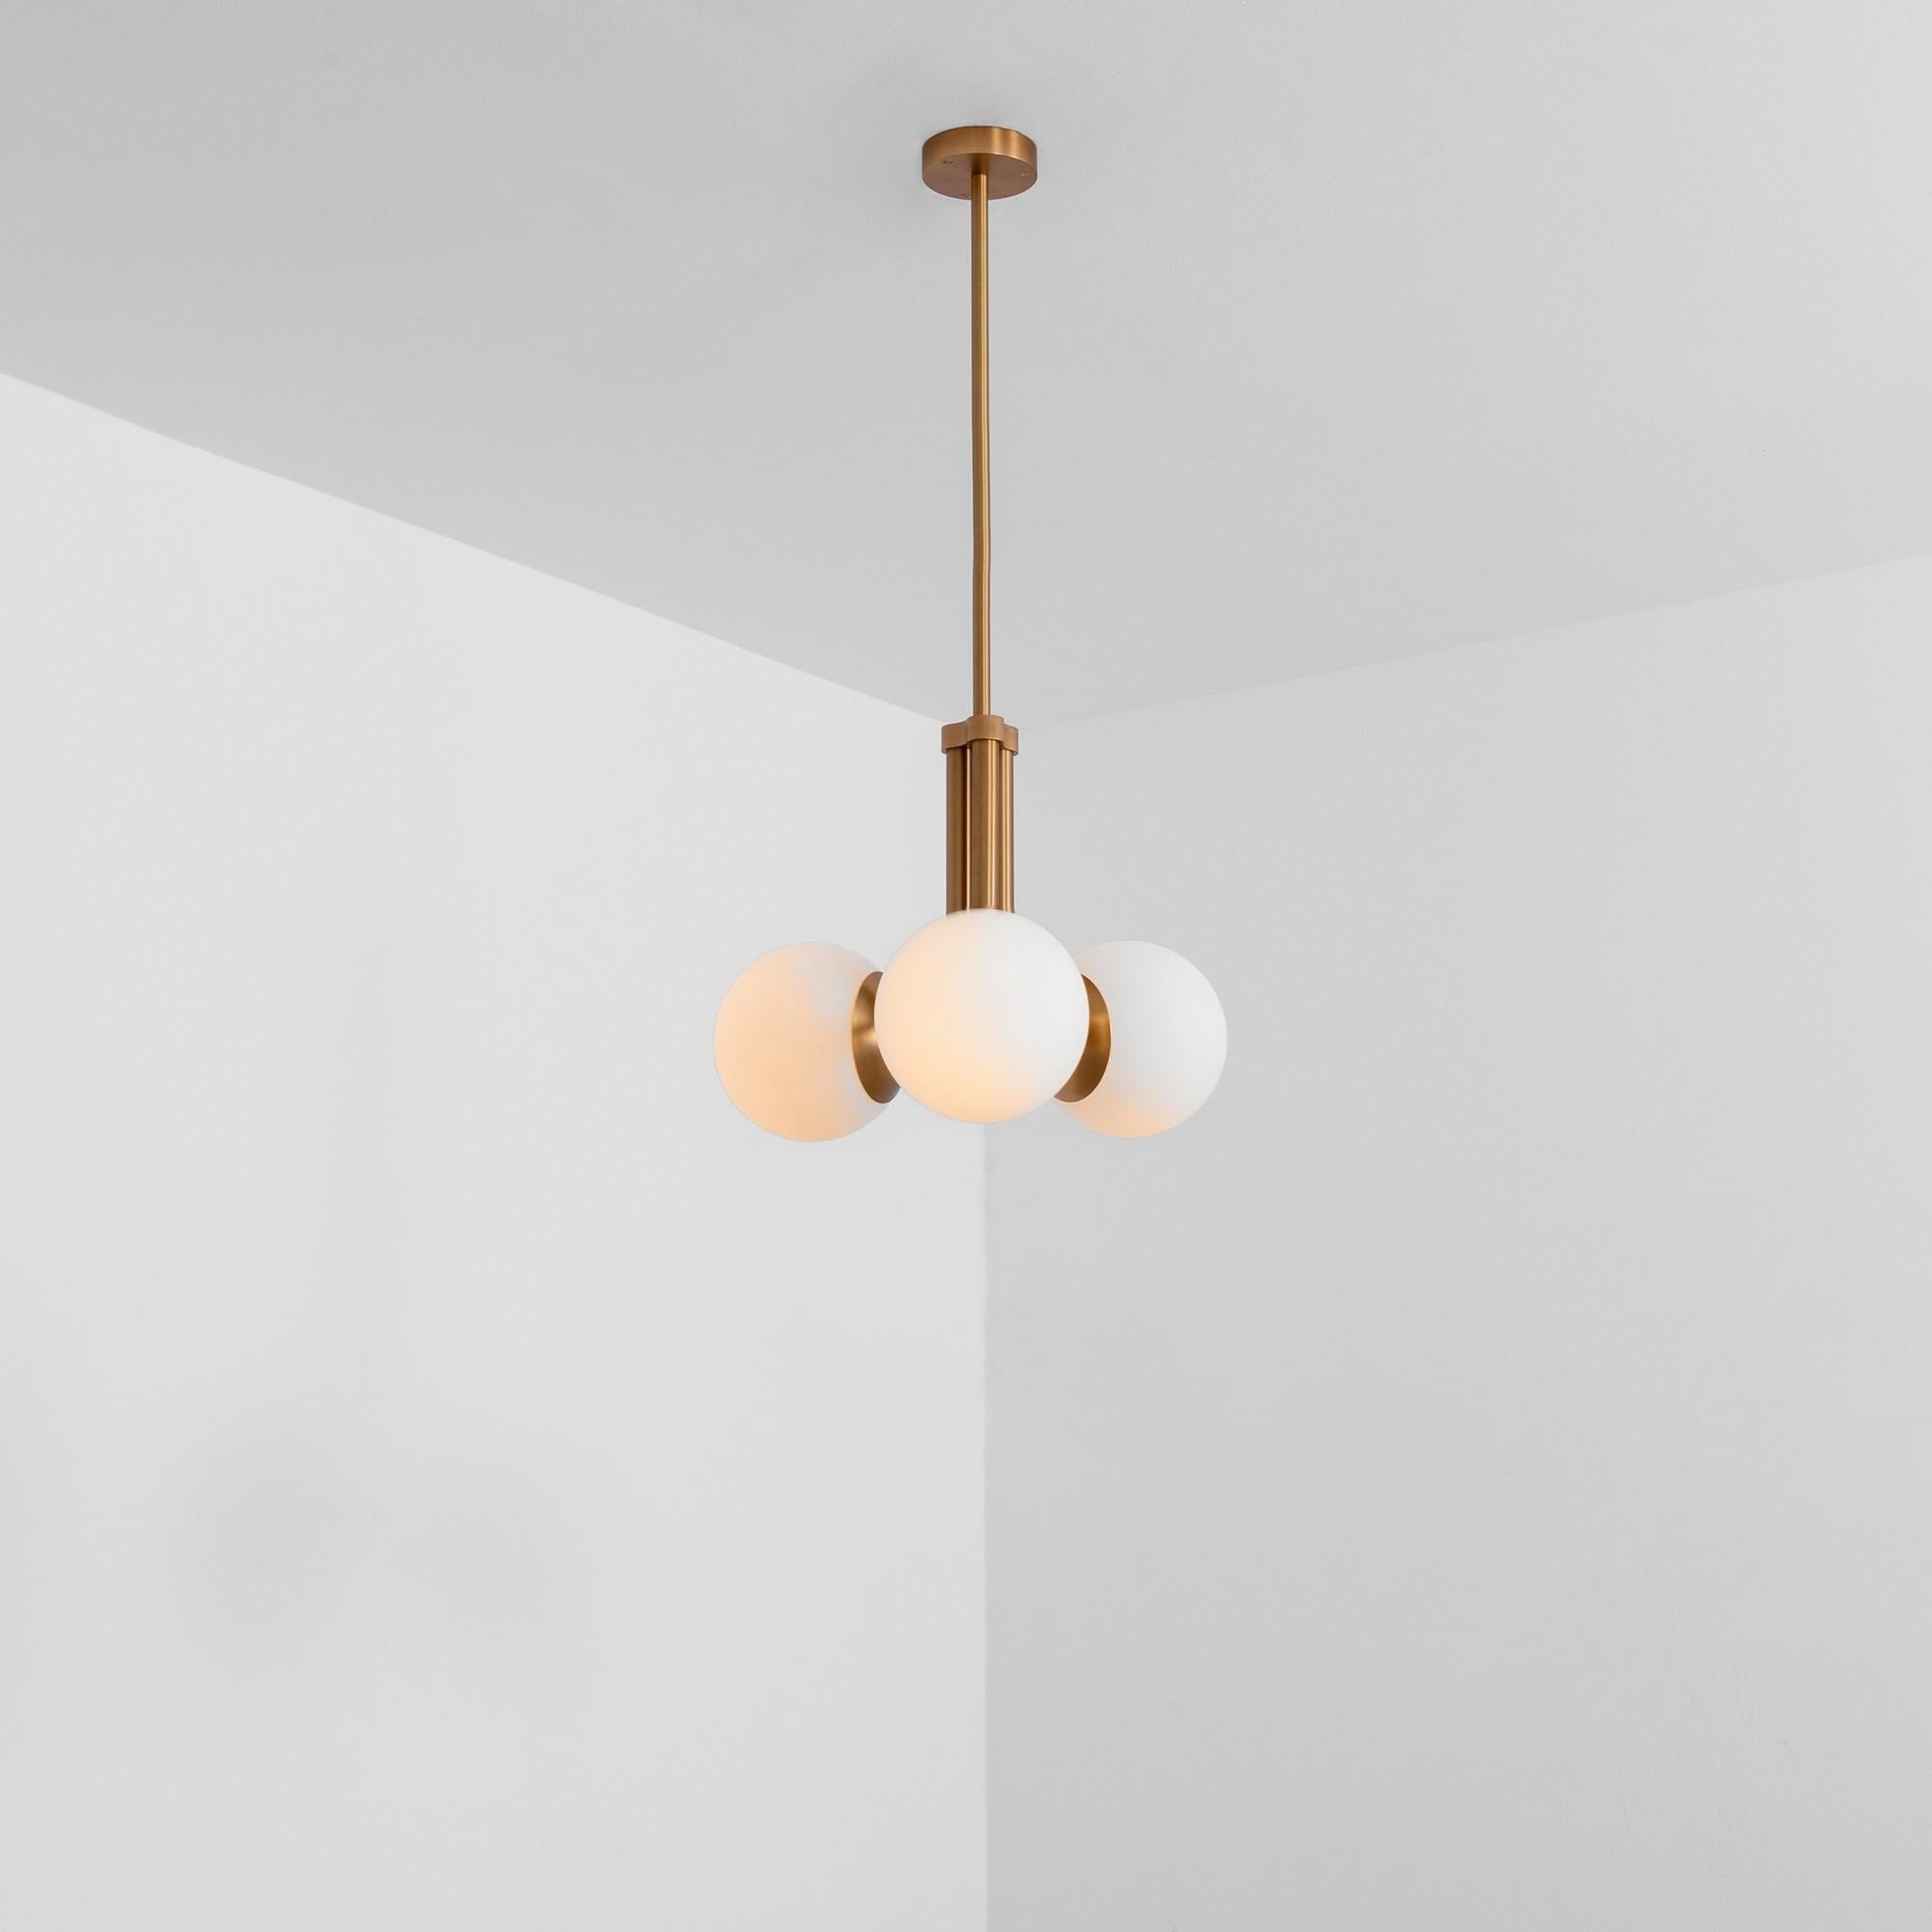 Tubular SM Brass Pendant Light 3 by Schwung
Dimensions: W 48 x D 48 x H 103 cm
Materials: Brass, frosted glass

Finishes available: Black gunmetal, polished nickel, brass
Other sizes available

 Schwung is a german word, and loosely defined, means